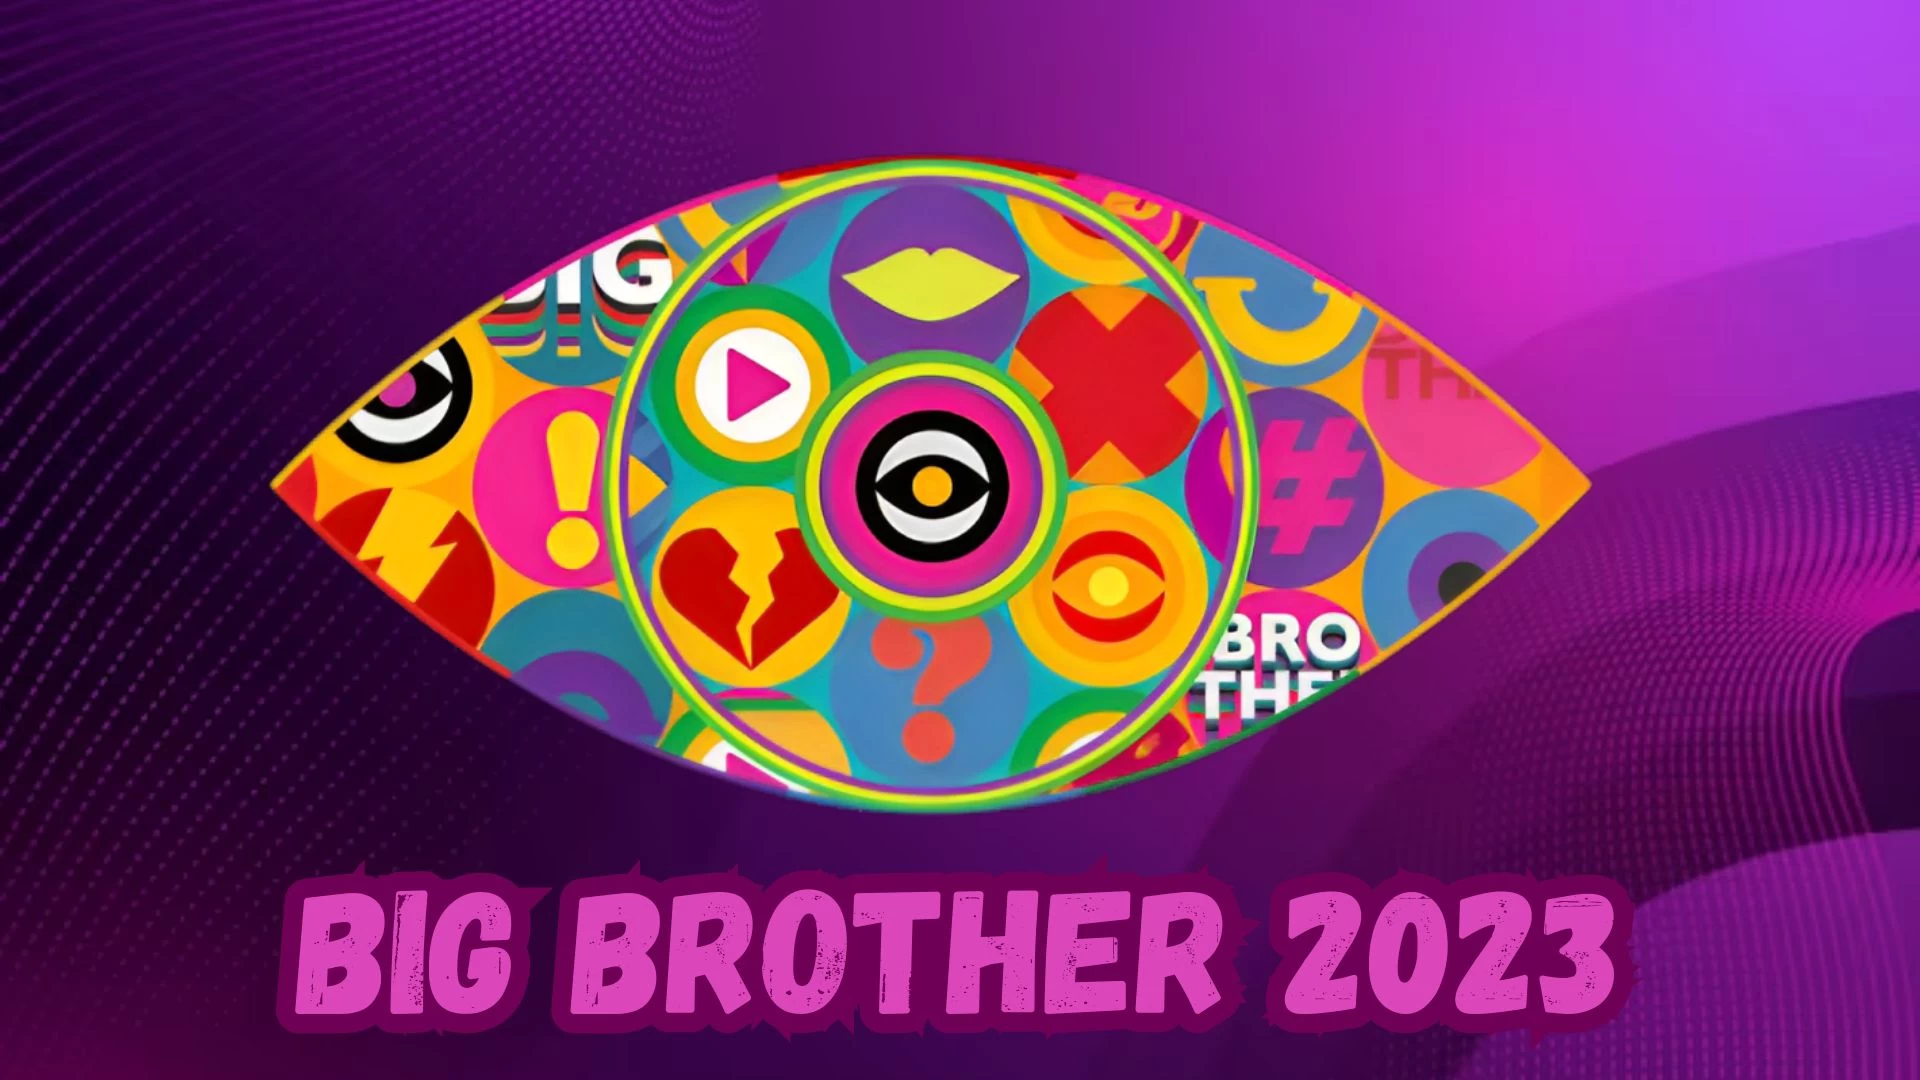 Big Brother 2023 contestants List, Format, Overview, Trailer And More